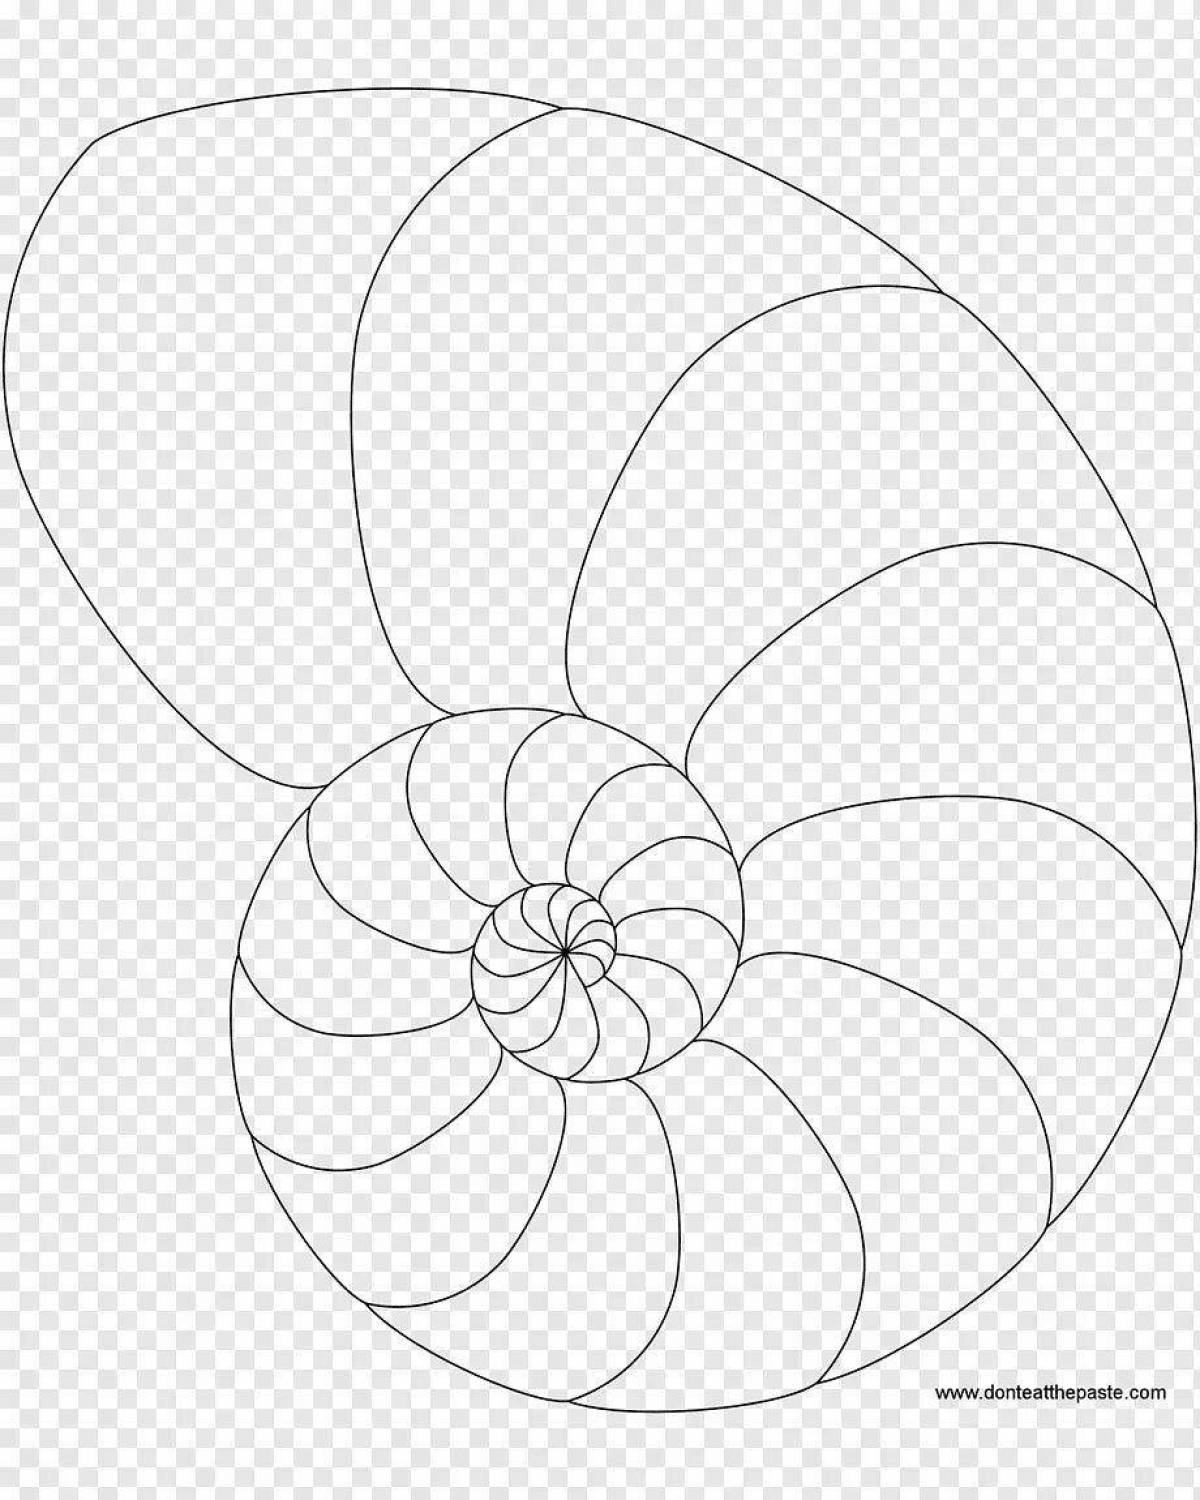 Brilliantly shaded spiral drawing page